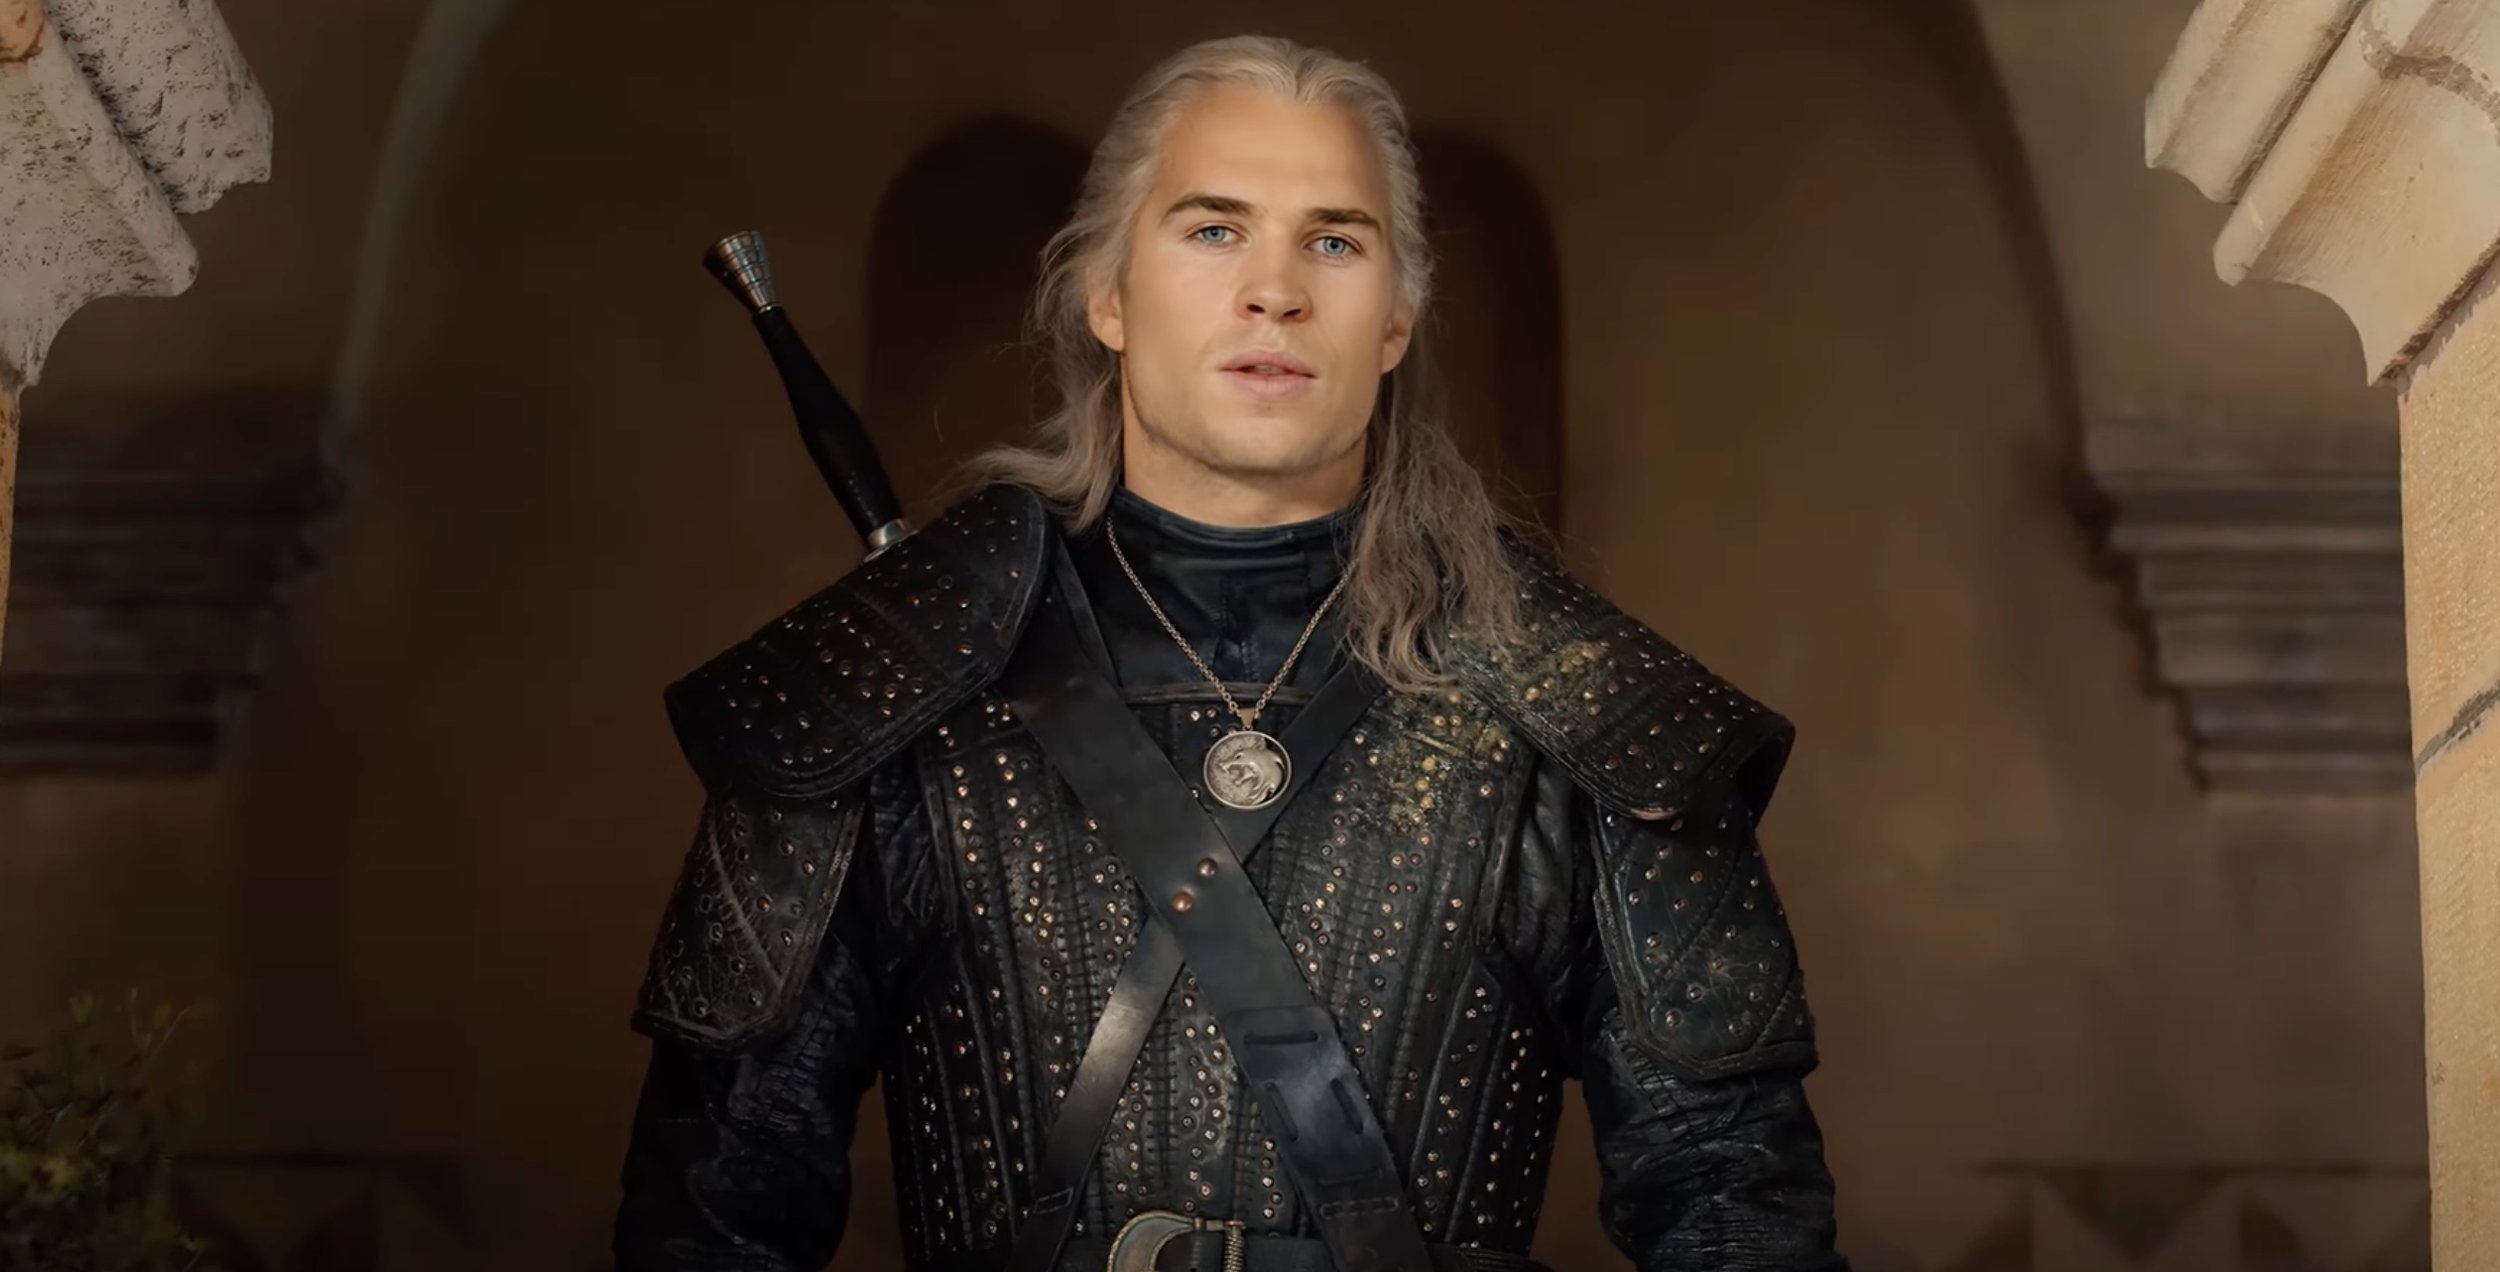 THE WITCHER Producer Says Liam Hemsworth 